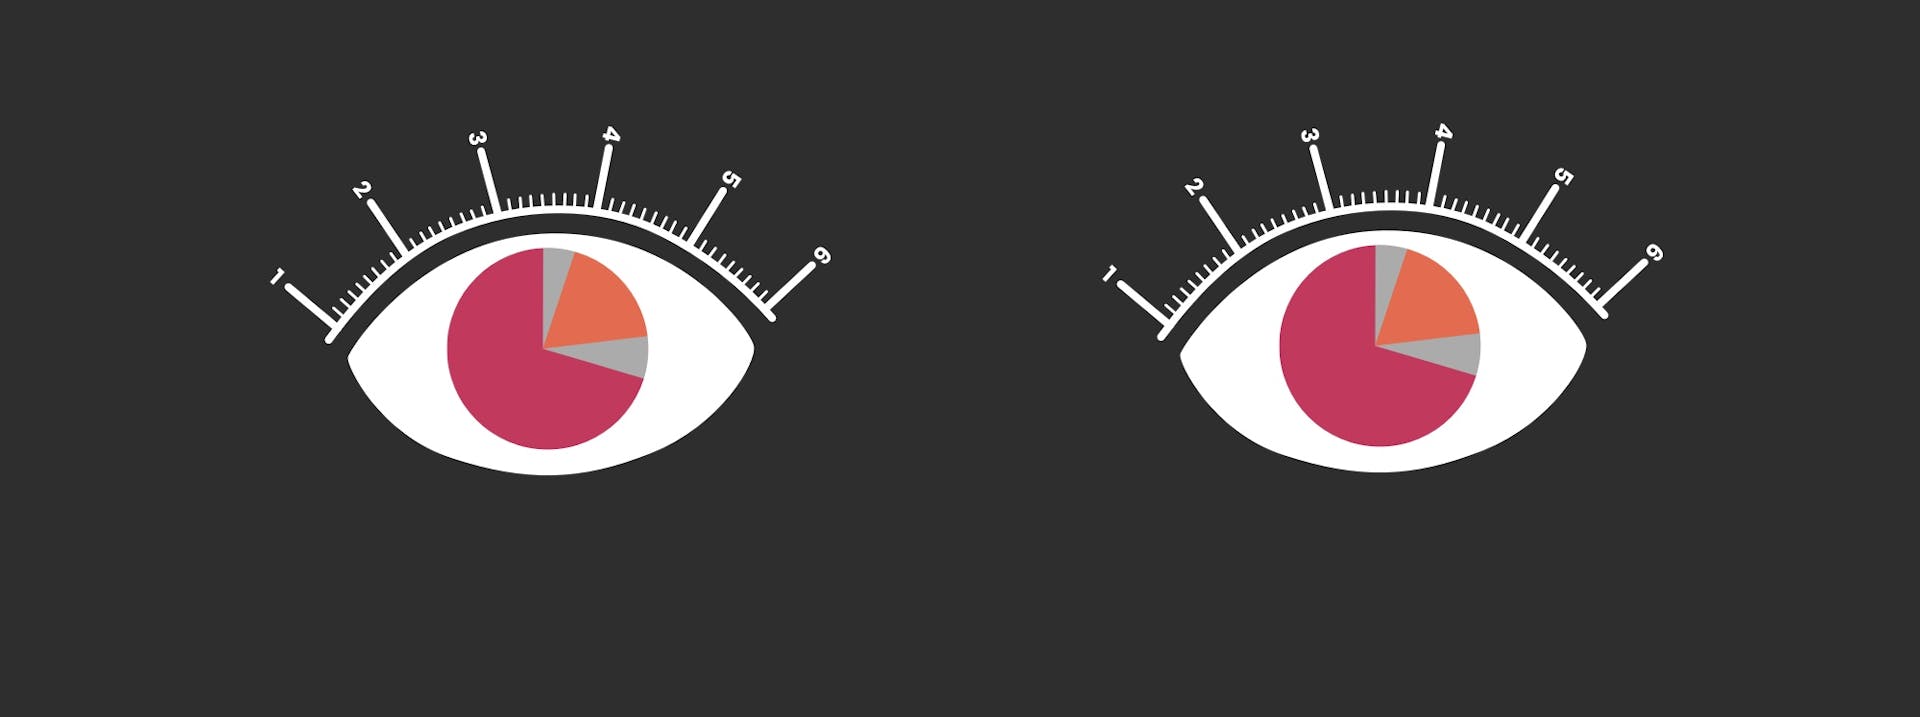 Two illustrated eyes, the eyes are bar charts. 